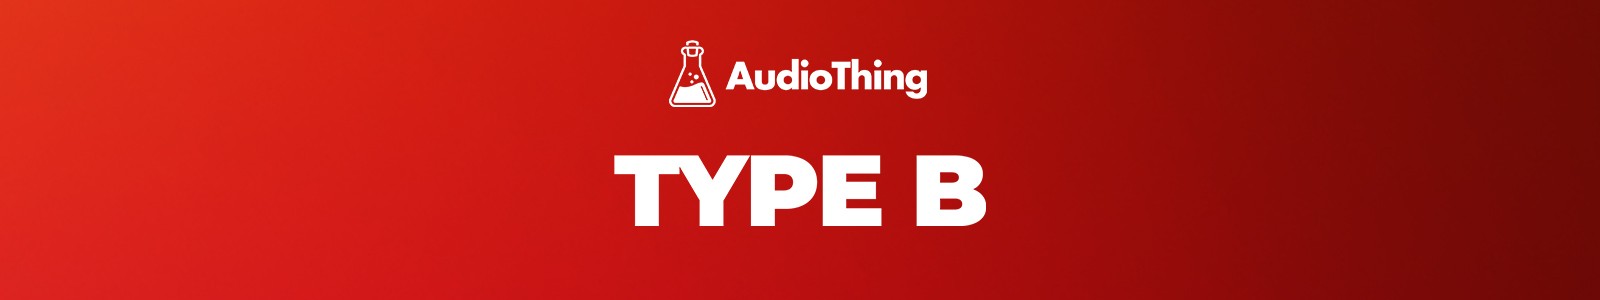 Type B by AudioThing